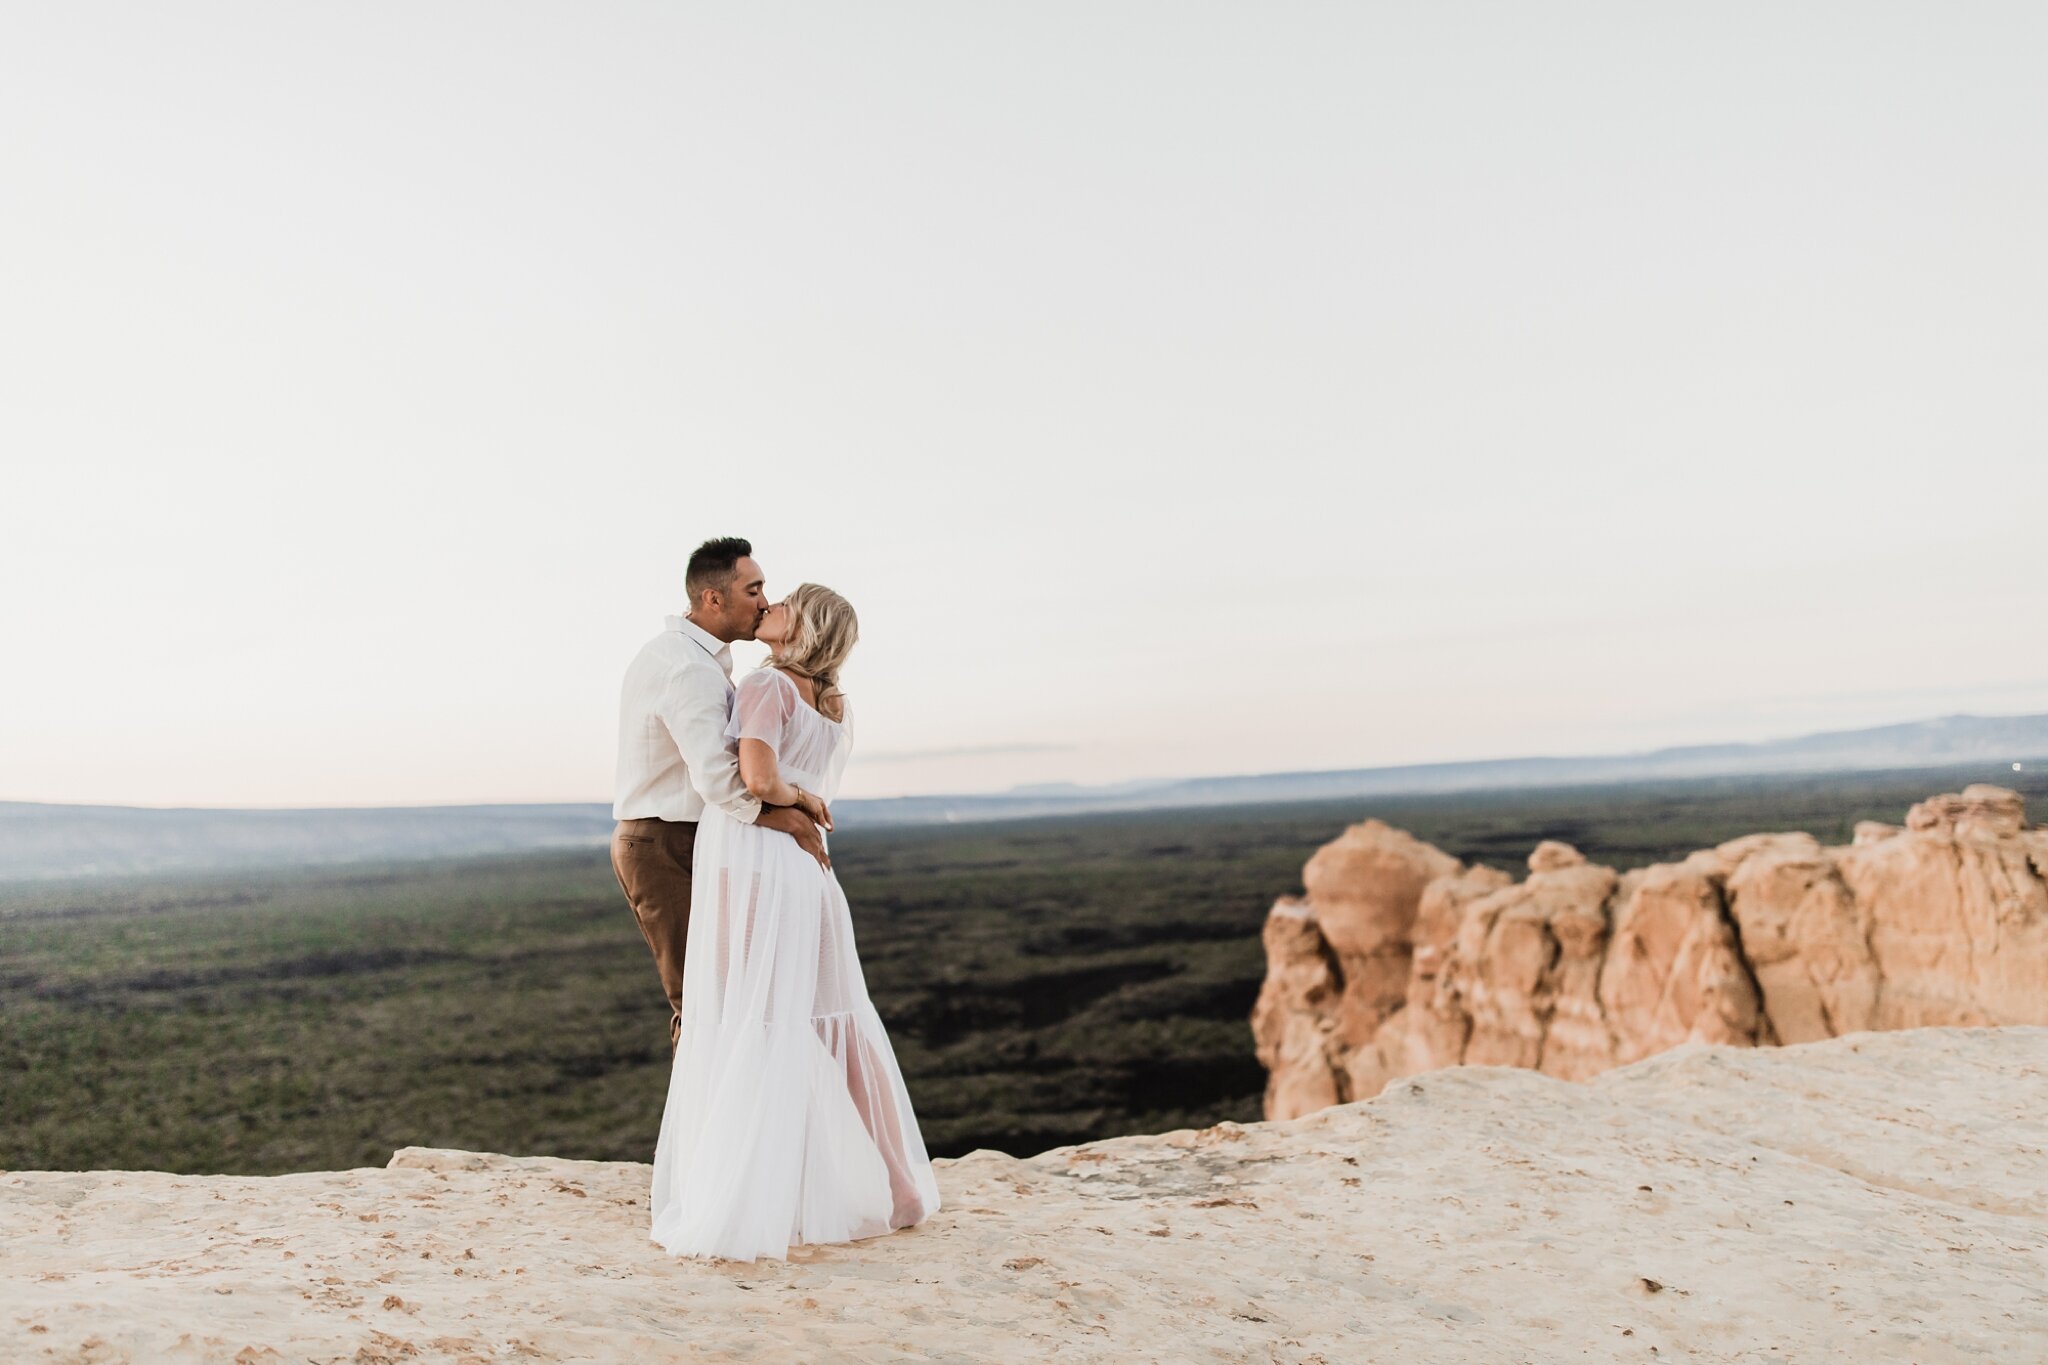 Alicia+lucia+photography+-+albuquerque+wedding+photographer+-+santa+fe+wedding+photography+-+new+mexico+wedding+photographer+-+new+mexico+wedding+-+anniversary+-+styled+anniversary+-+elopement+-+styled+elopement_0056.jpg